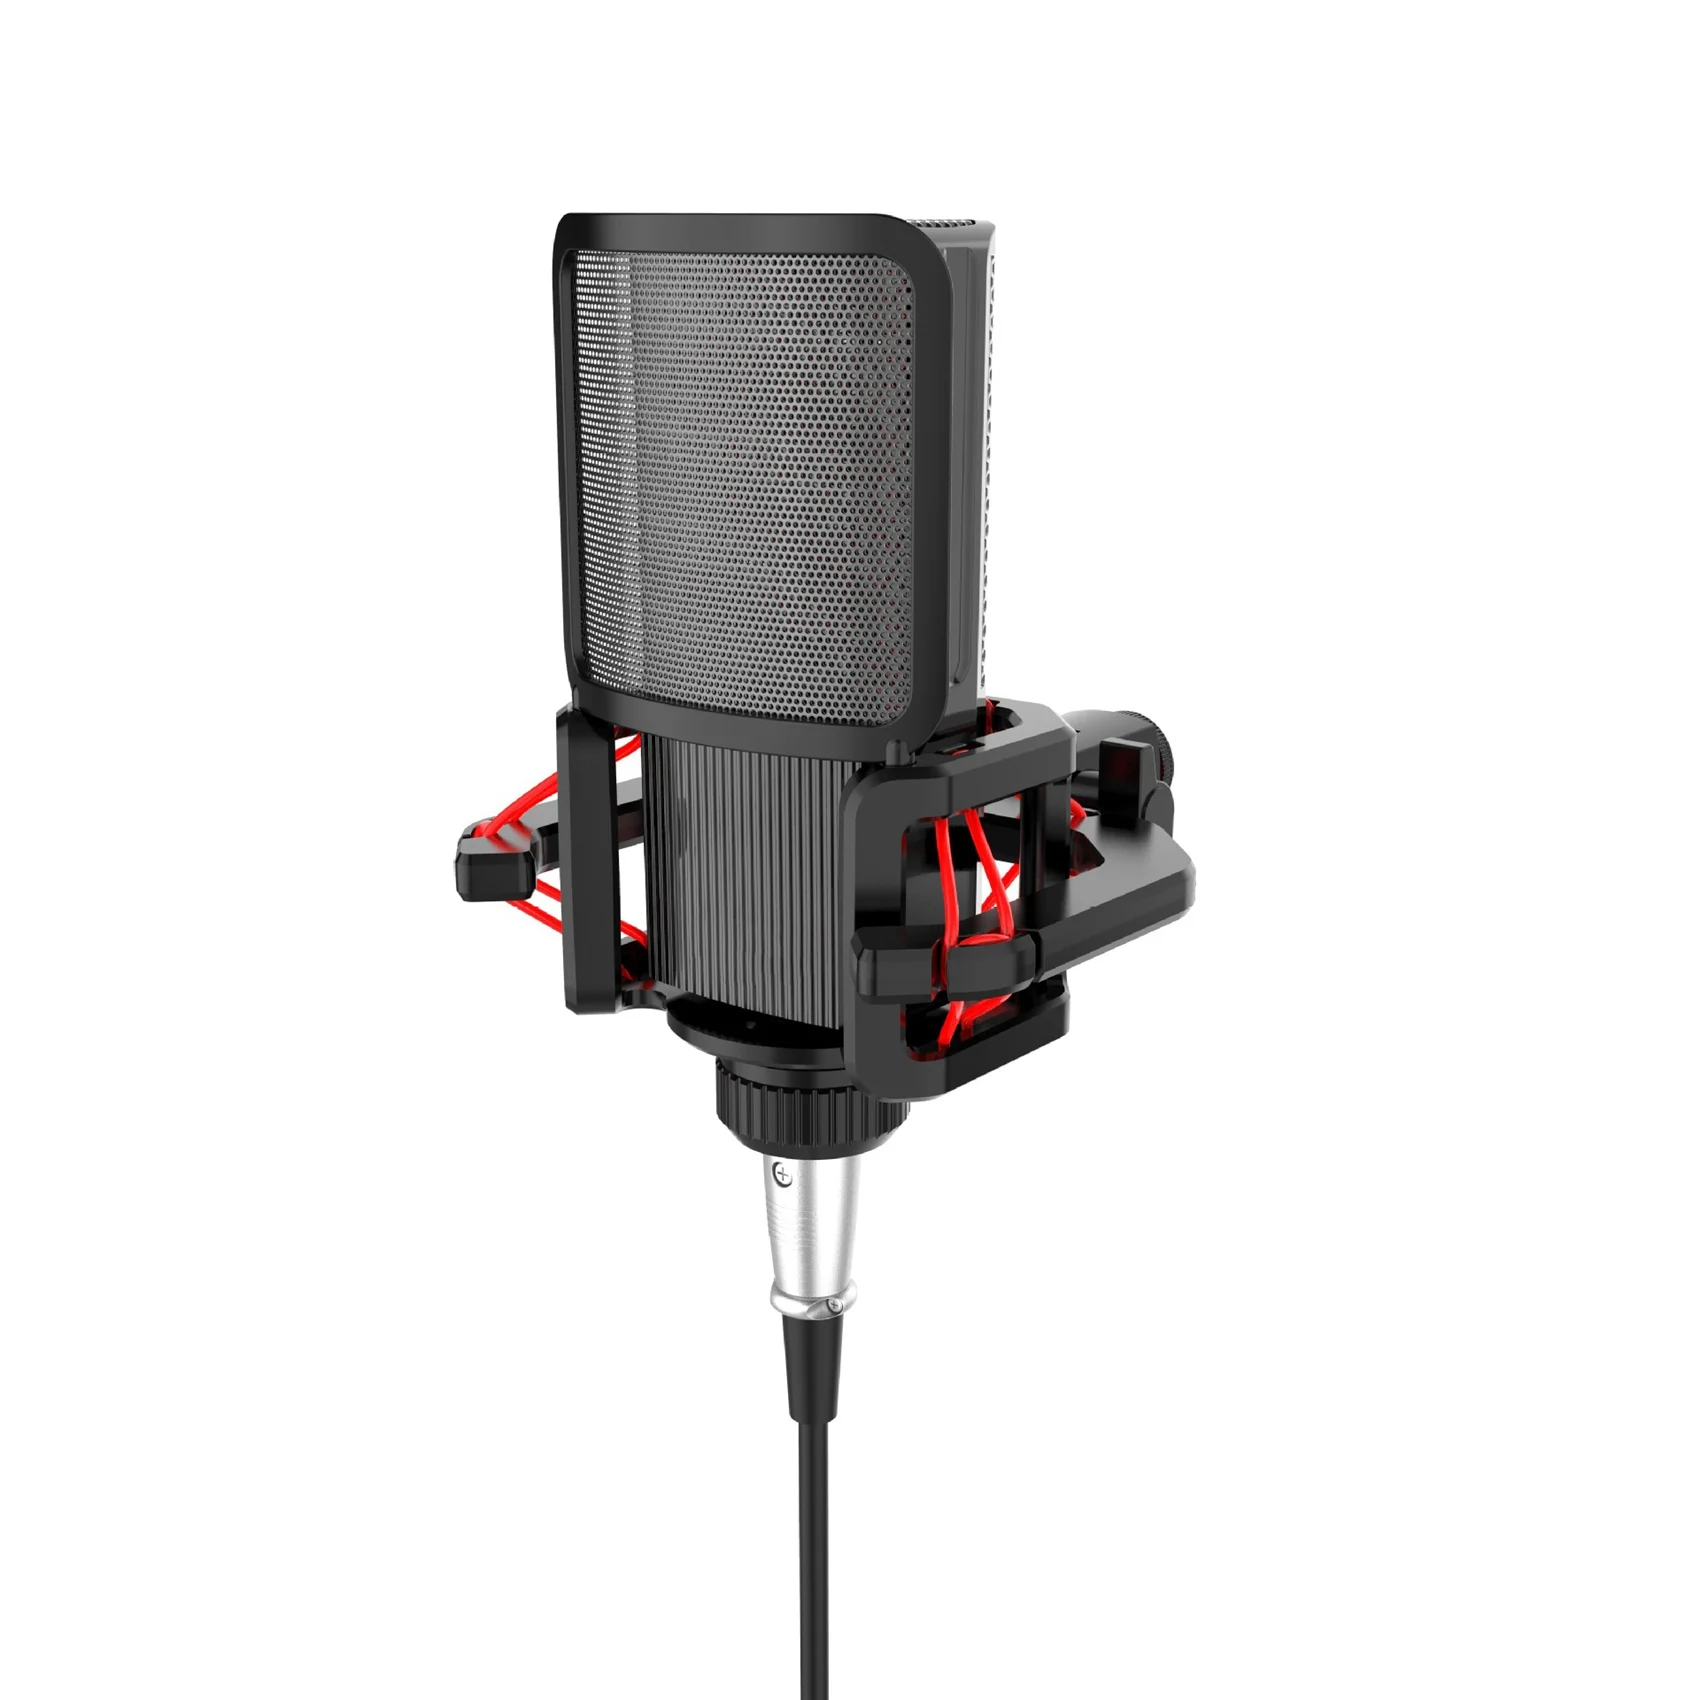 Microphone Shock Mount with Microphone Filter Windscreen Reduce Noise Anti Vibration Screen Stable Easy Install,Red images - 6